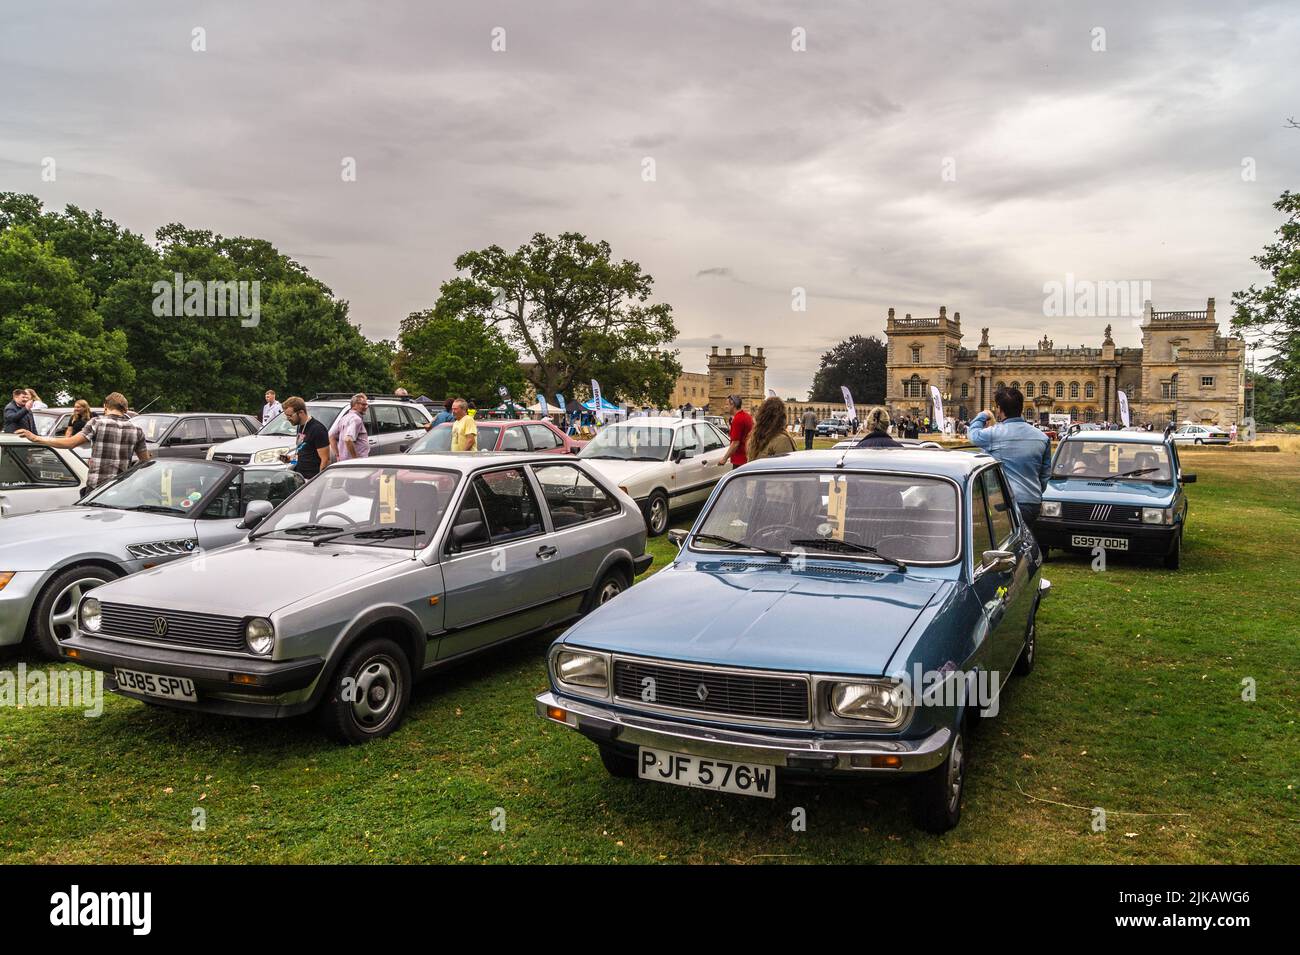 1980 Renault 12 and 1987 Volkswagen Golf saloon cars, Festival of the Unexceptional, Grimsthorpe Castle, Bourne, Lincolnshire, 2022 Stock Photo